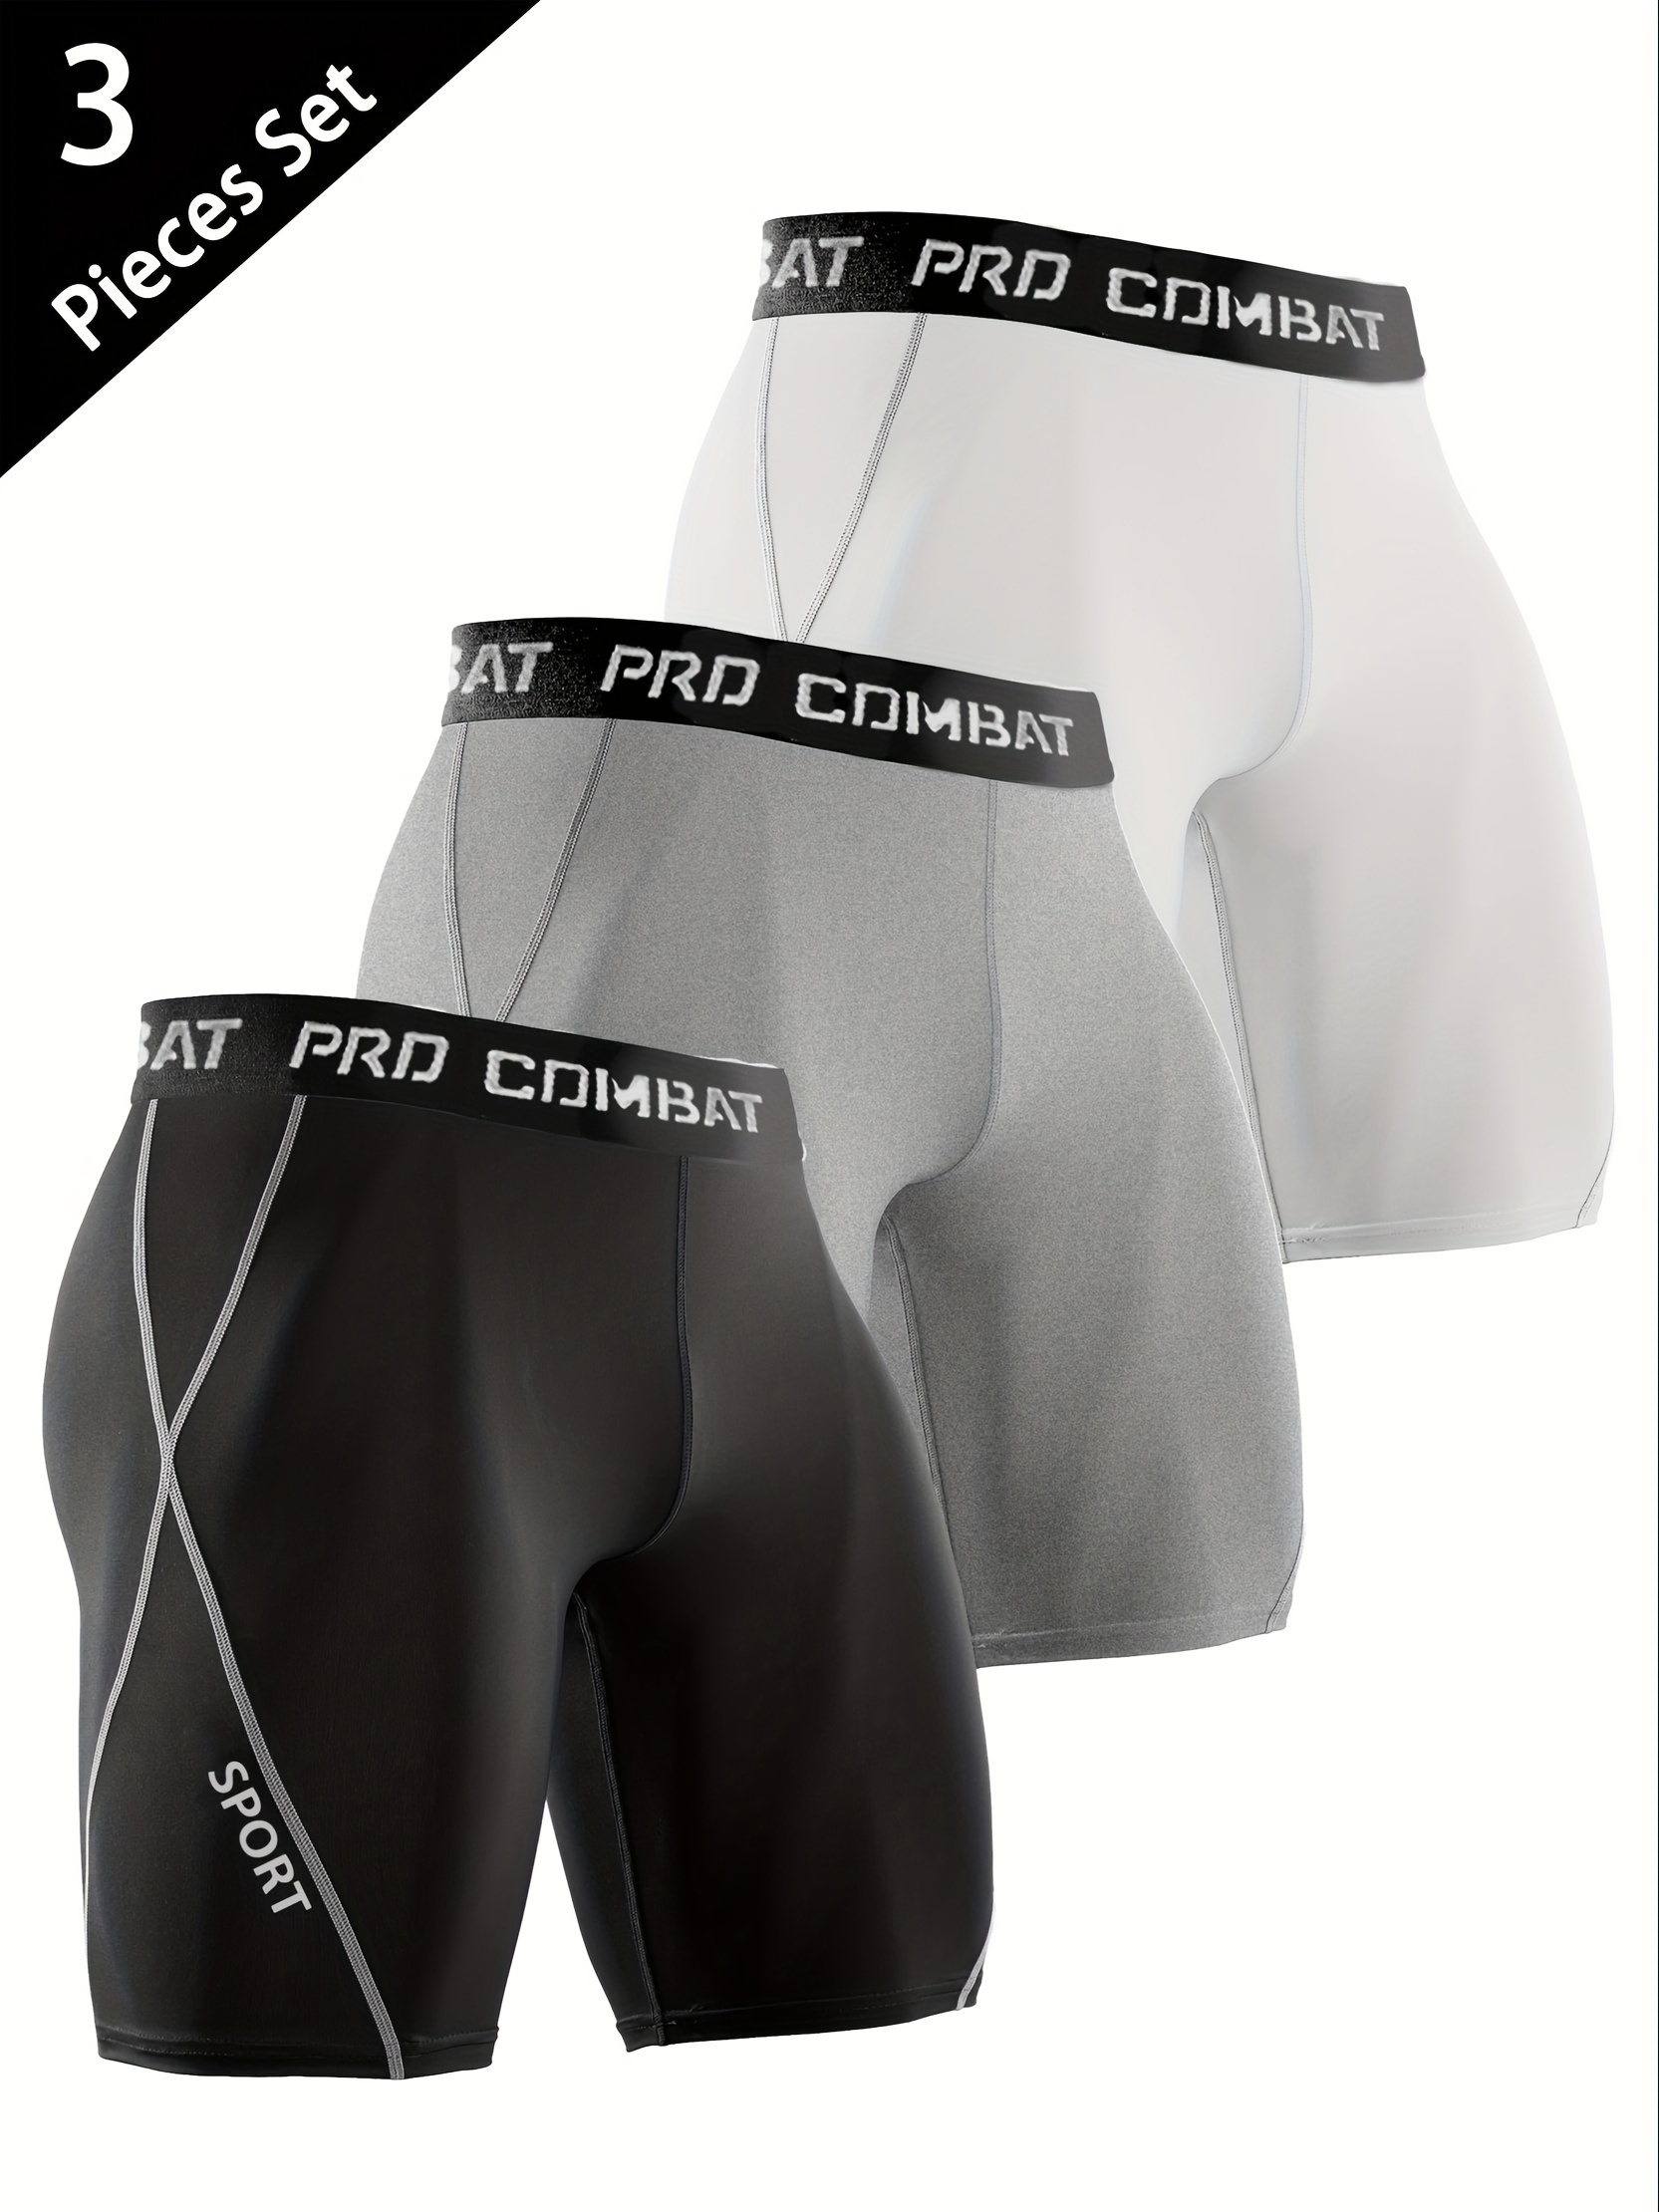 Uncover the Benefits of Compression Shorts in combat sports